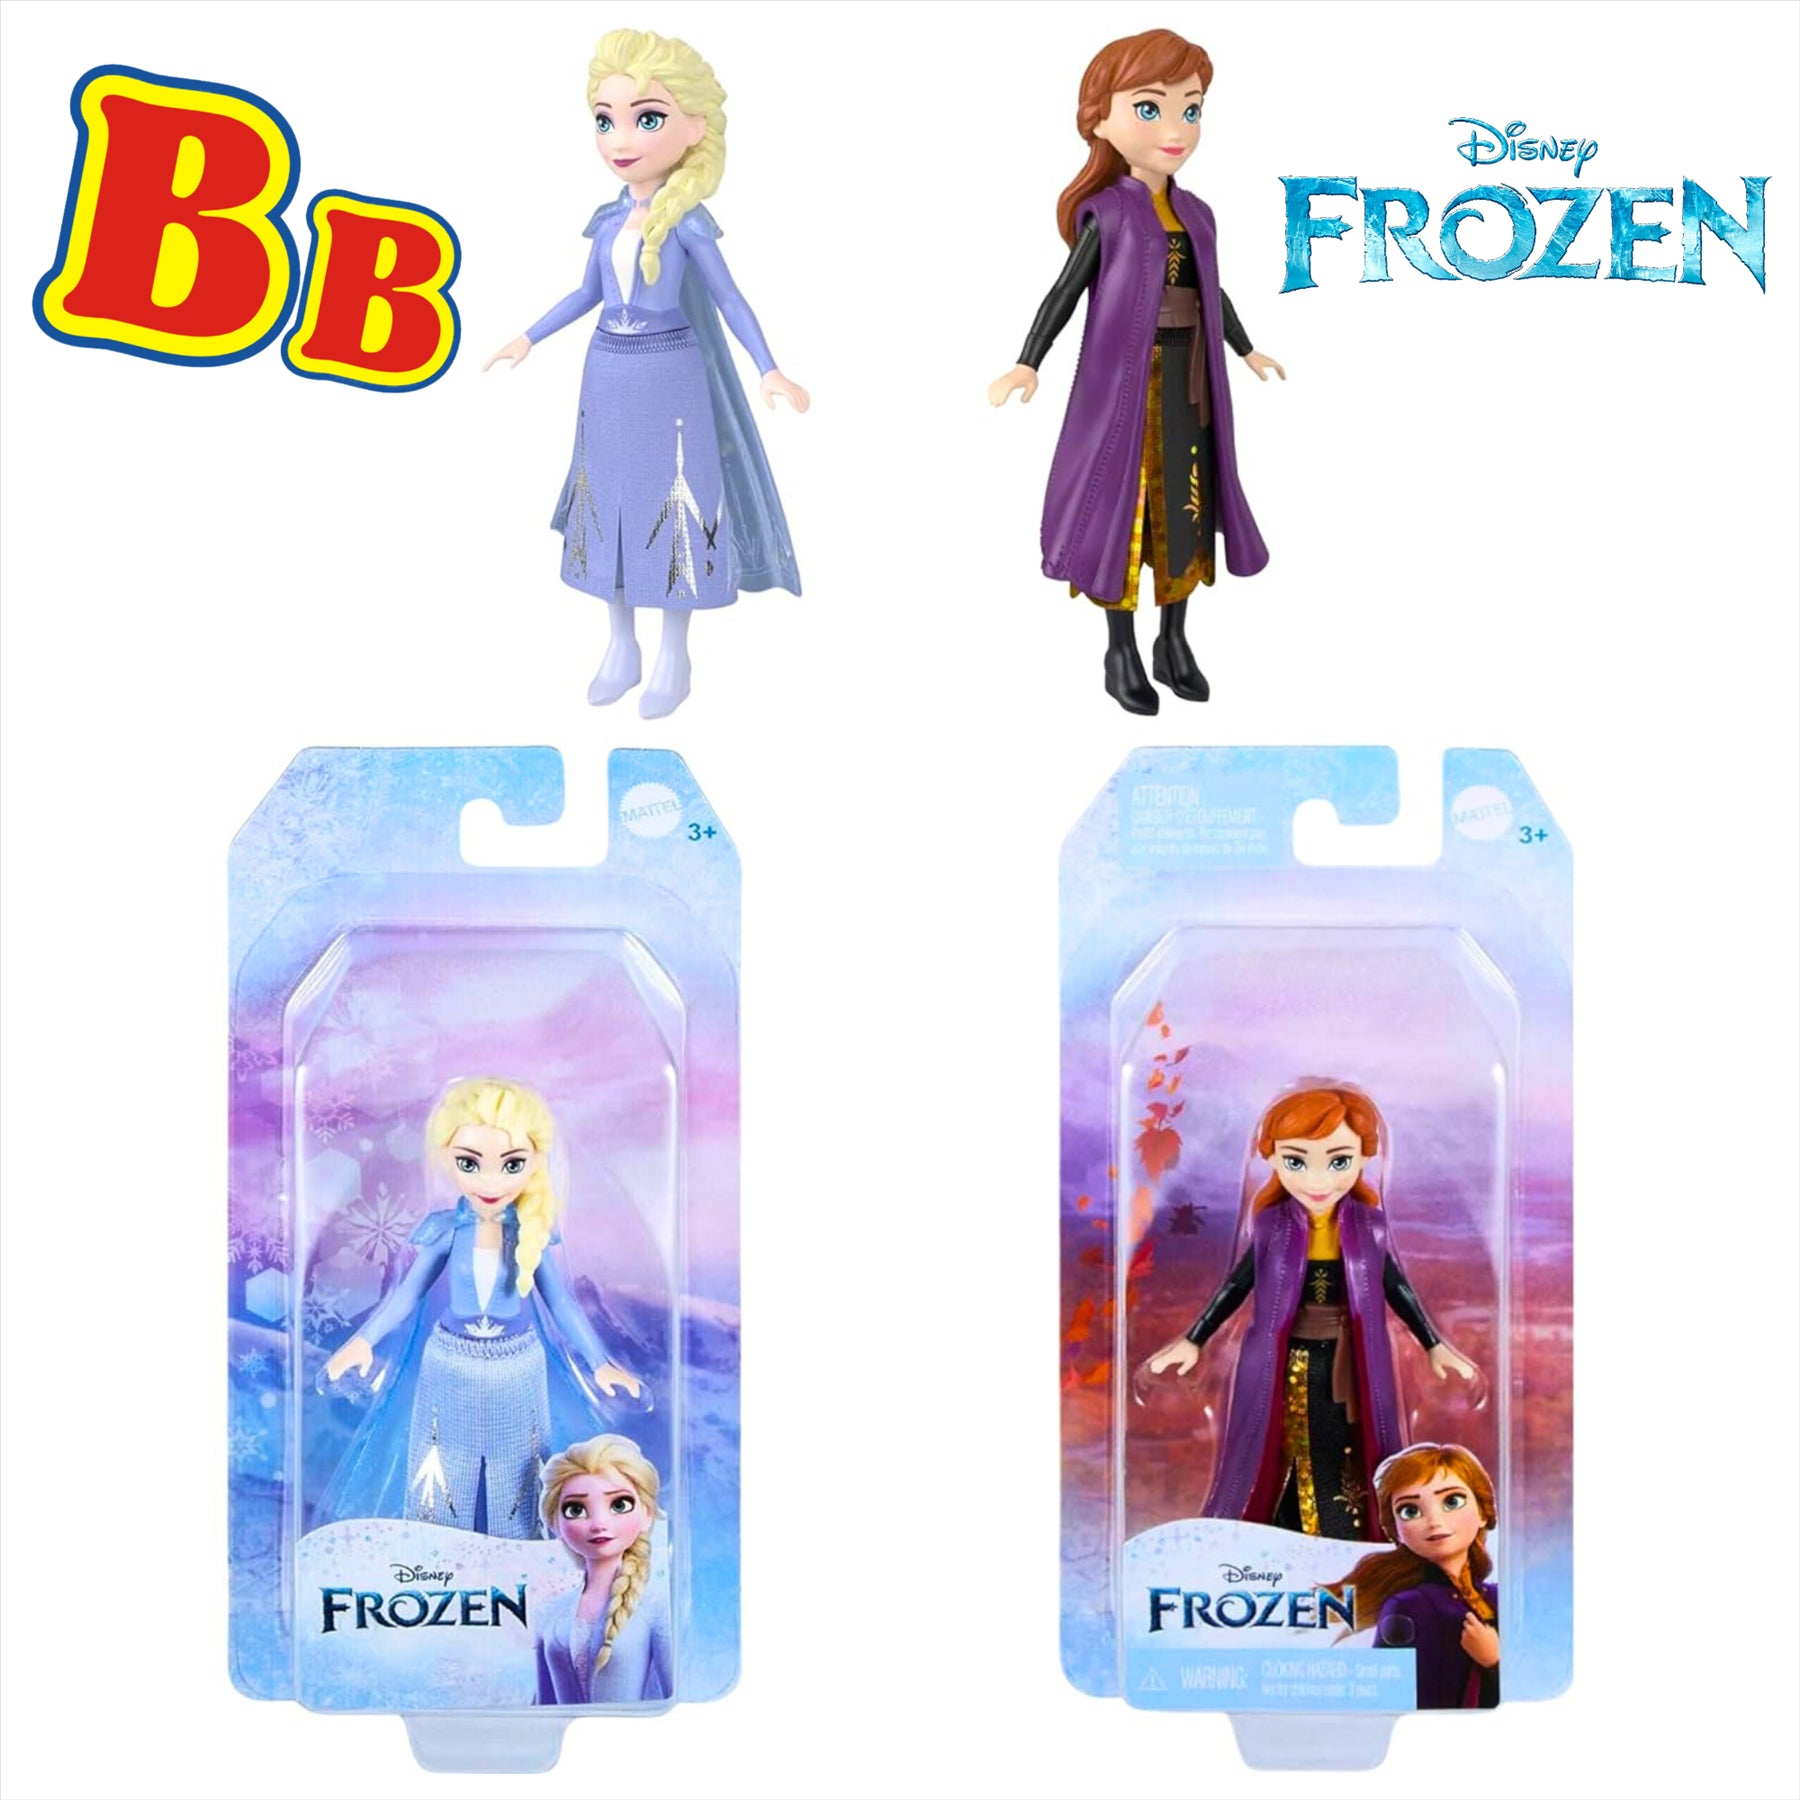 Disney Frozen Elsa and Anna 10cm Articulated Action Figure Play Toys - Twin Pack